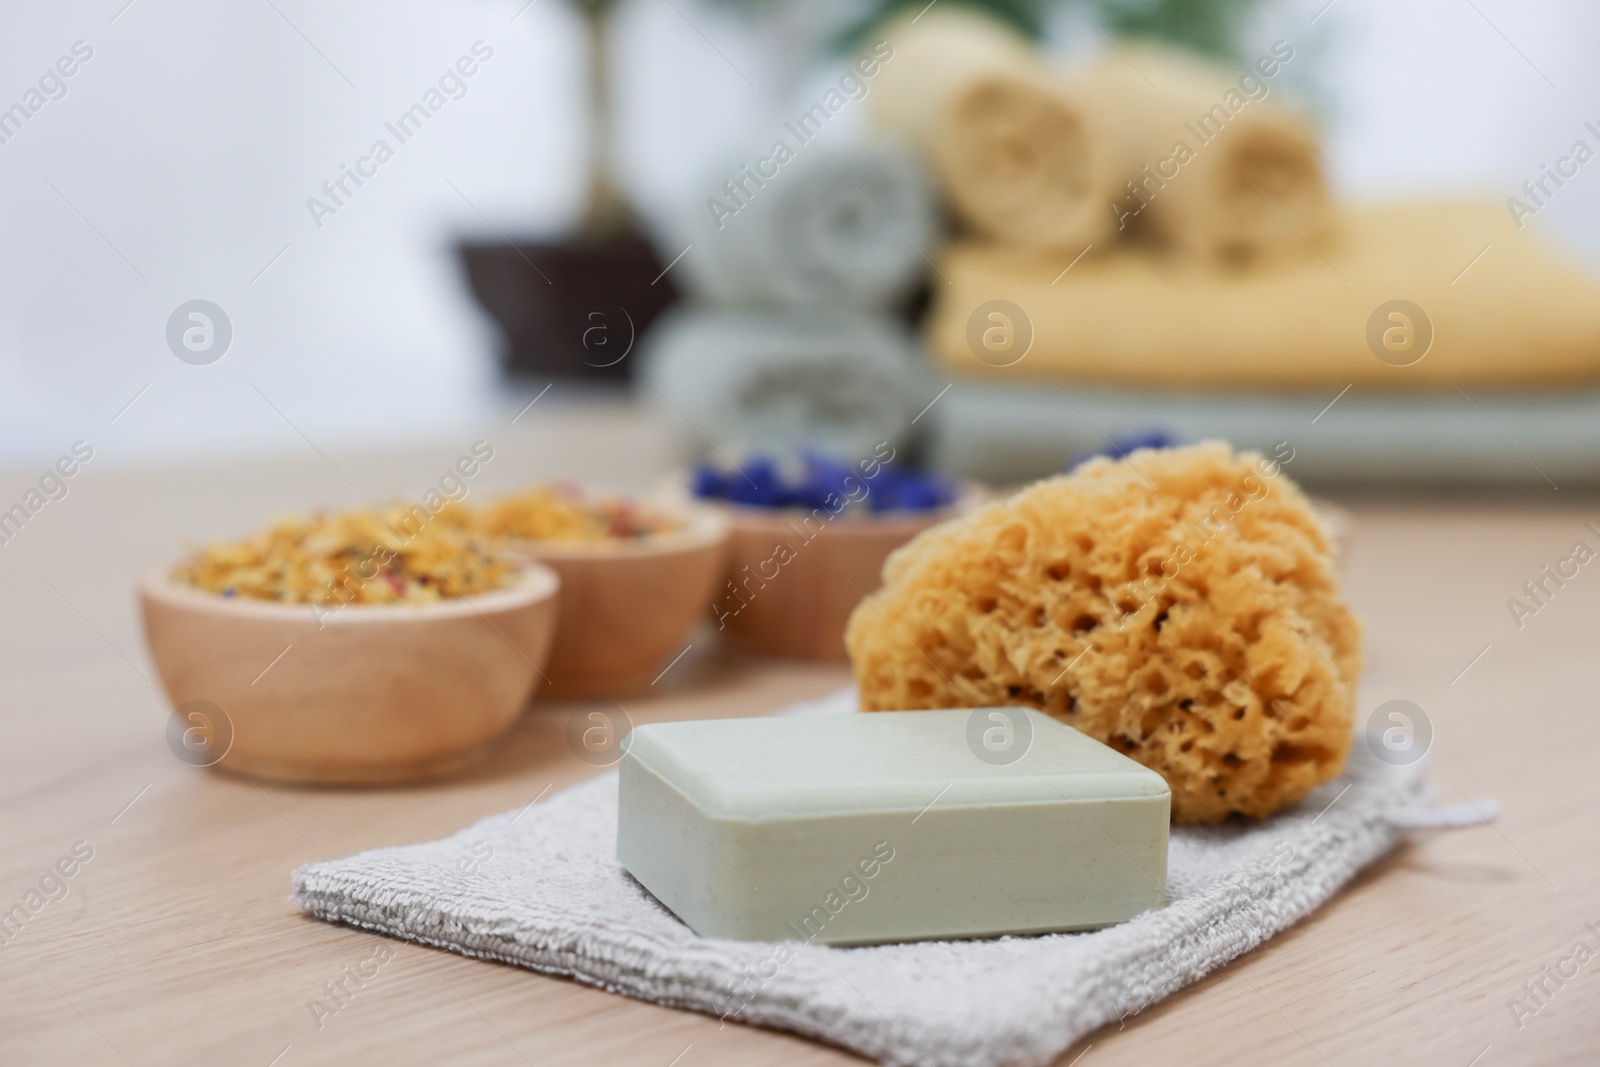 Photo of Soap bar, natural sponge and bowls of dry flowers on light wooden table. Spa therapy